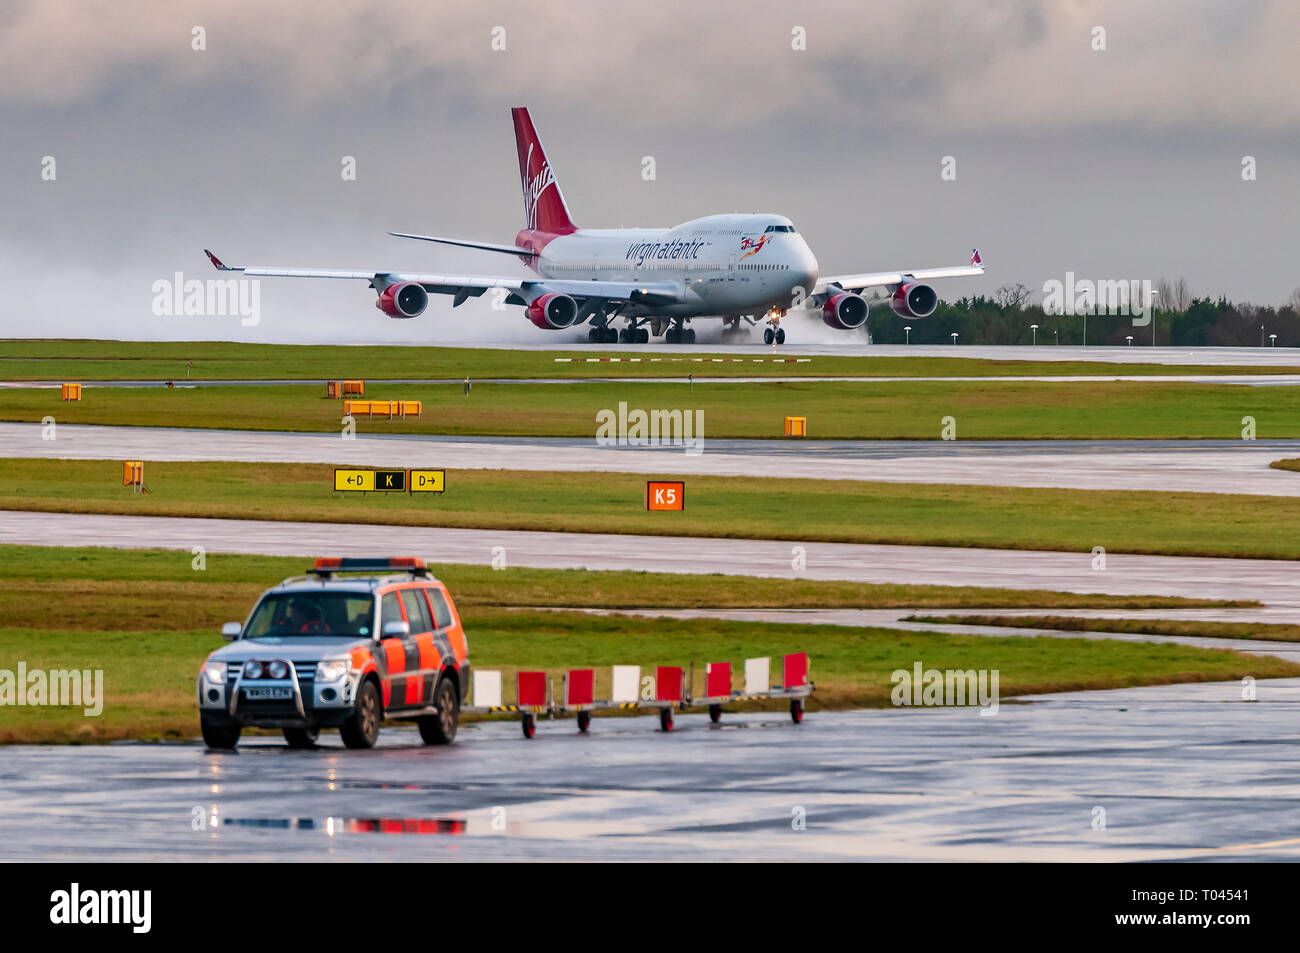 Boeing 747- 400 jumbo takes off at Manchester airport in the rain. Stock Photo